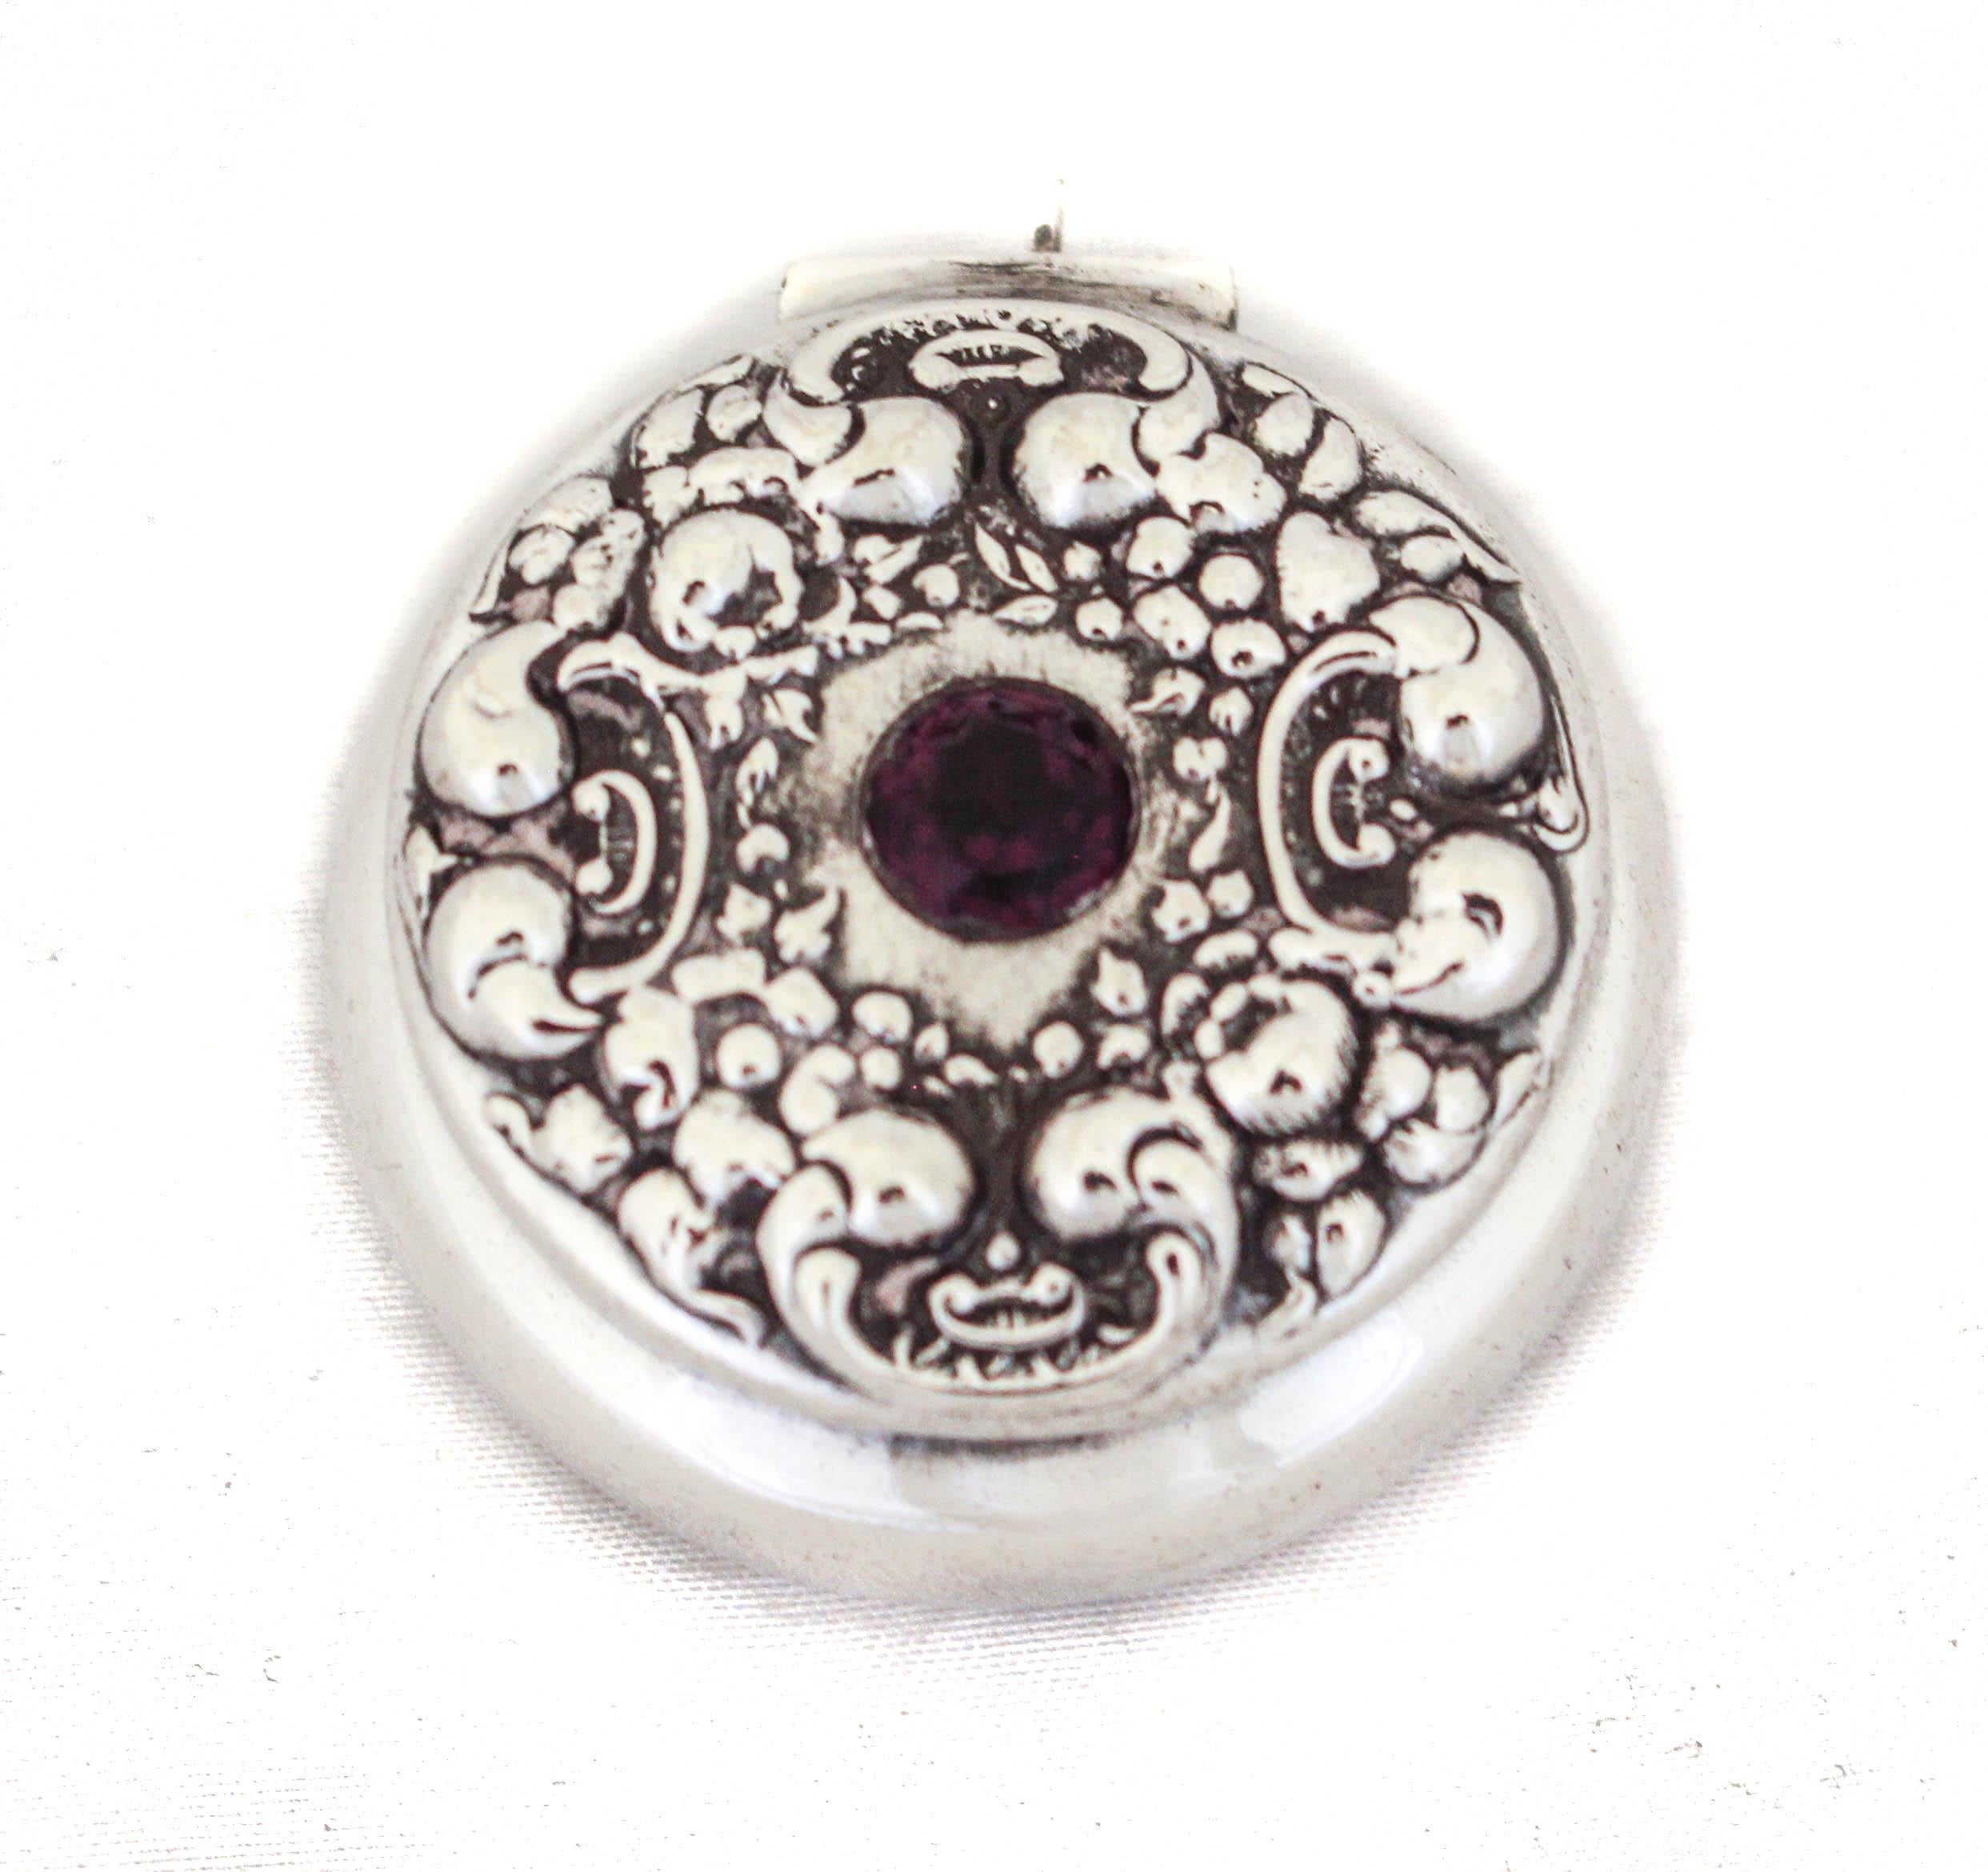 Being offered is a sterling silver pillbox manufactured by the La Pierre Silver Company.   Designed at the height of the Victorian era, it has an ornate design on the top (lid) with a garnet stone in the center.  The lid is attached and opens via a